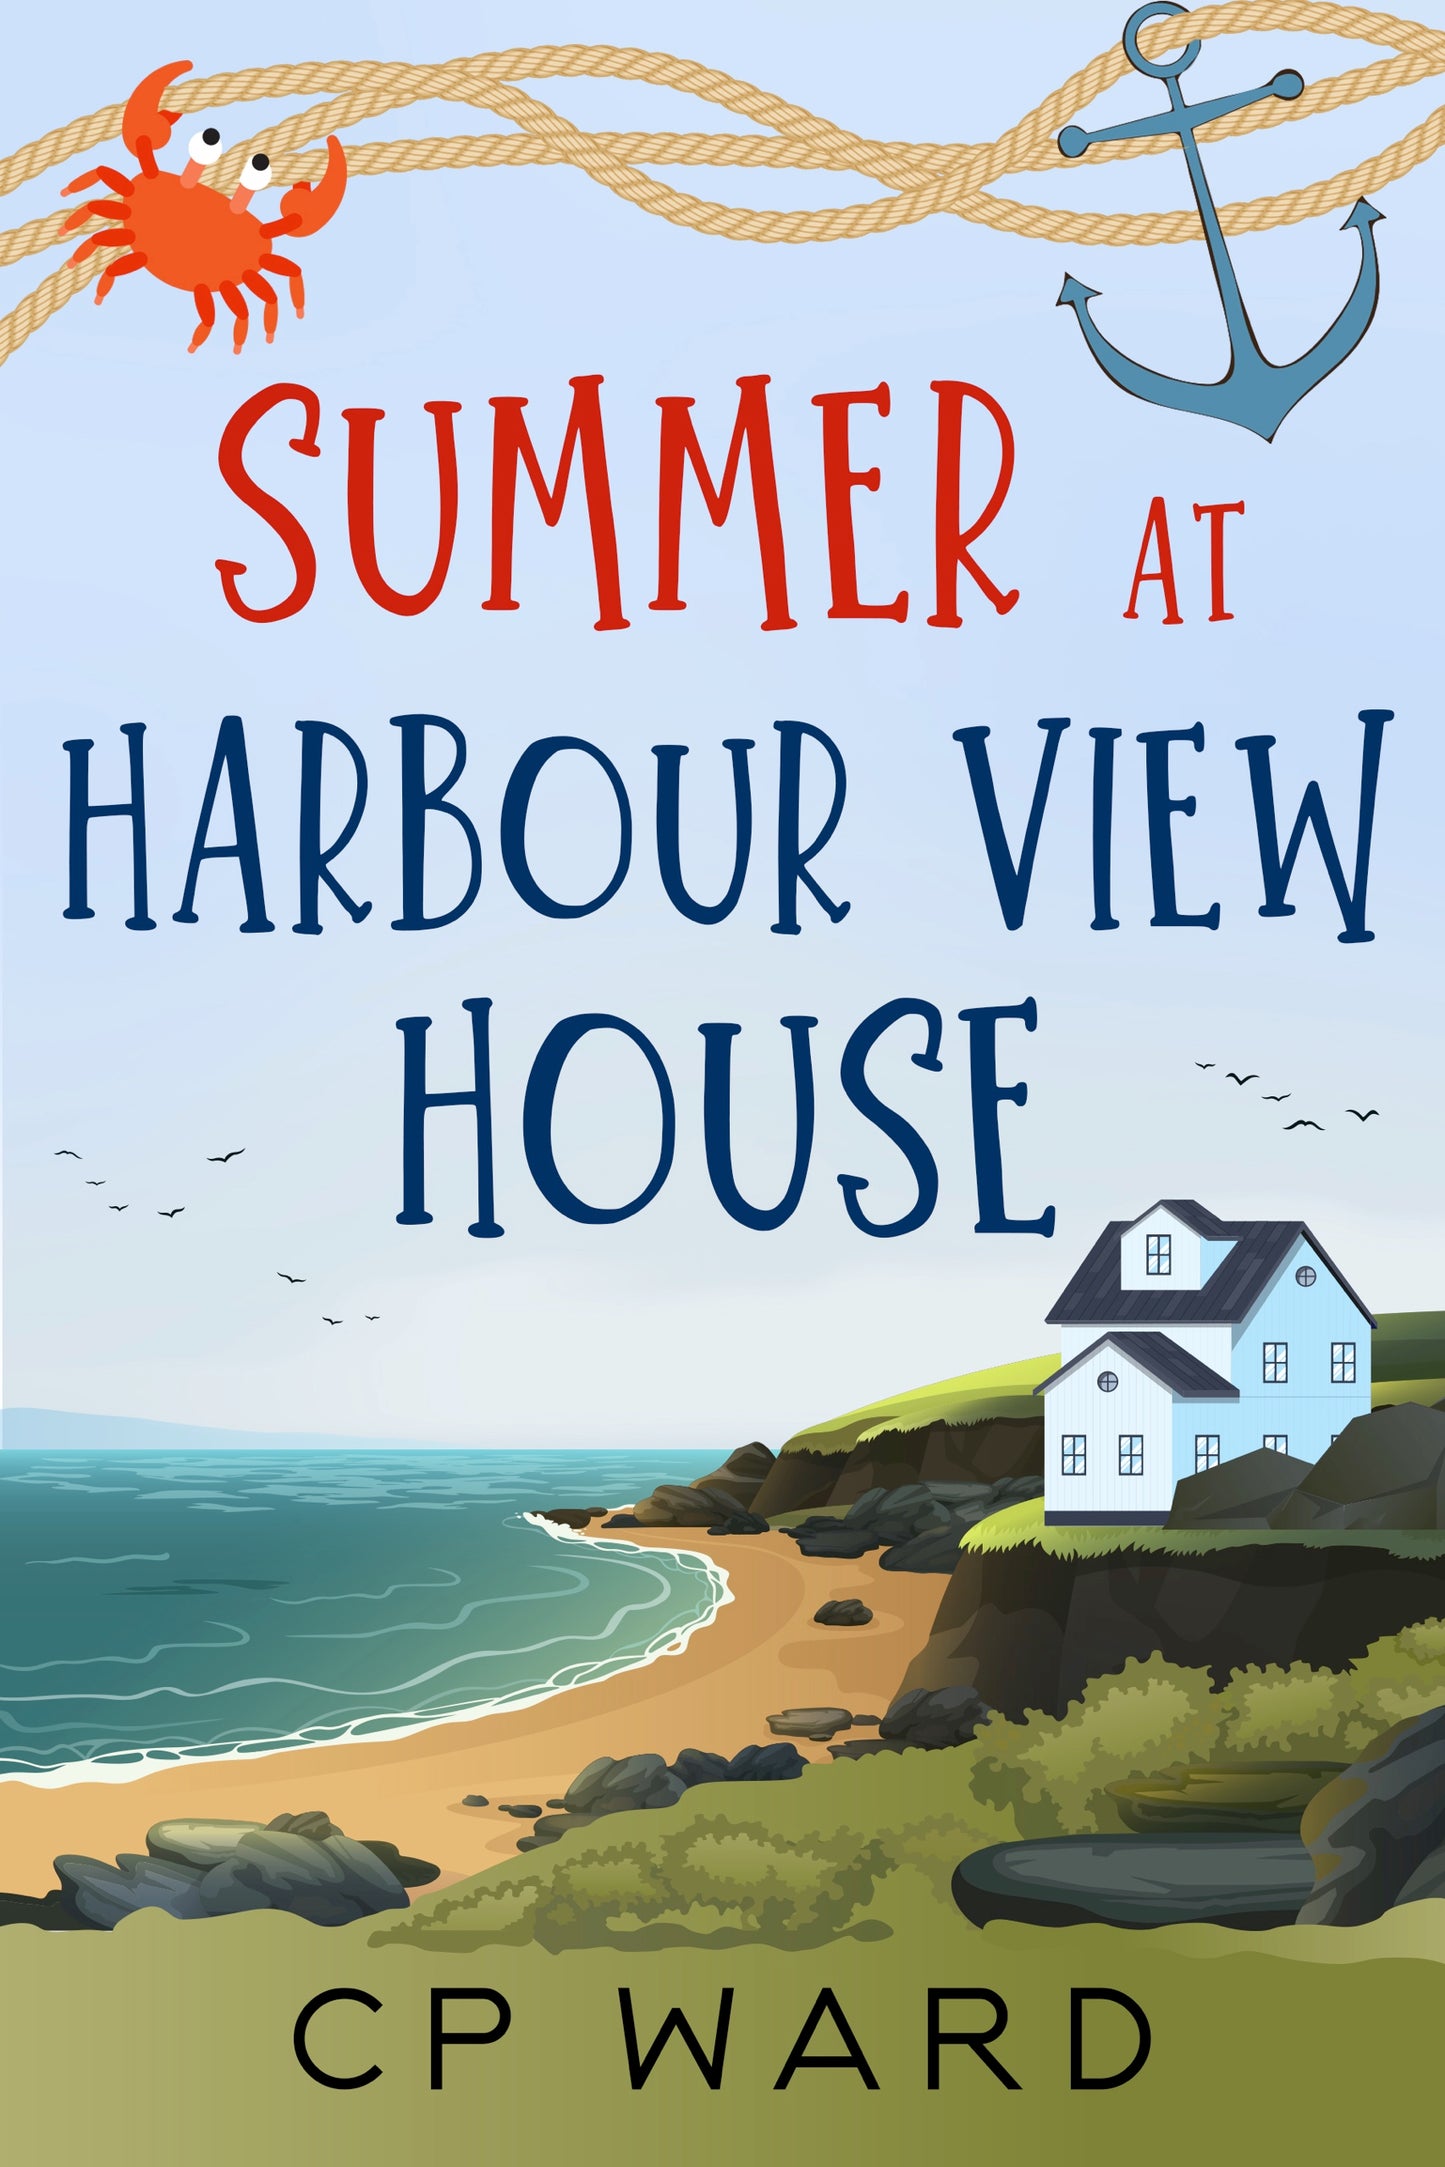 Summer at Harbour View House